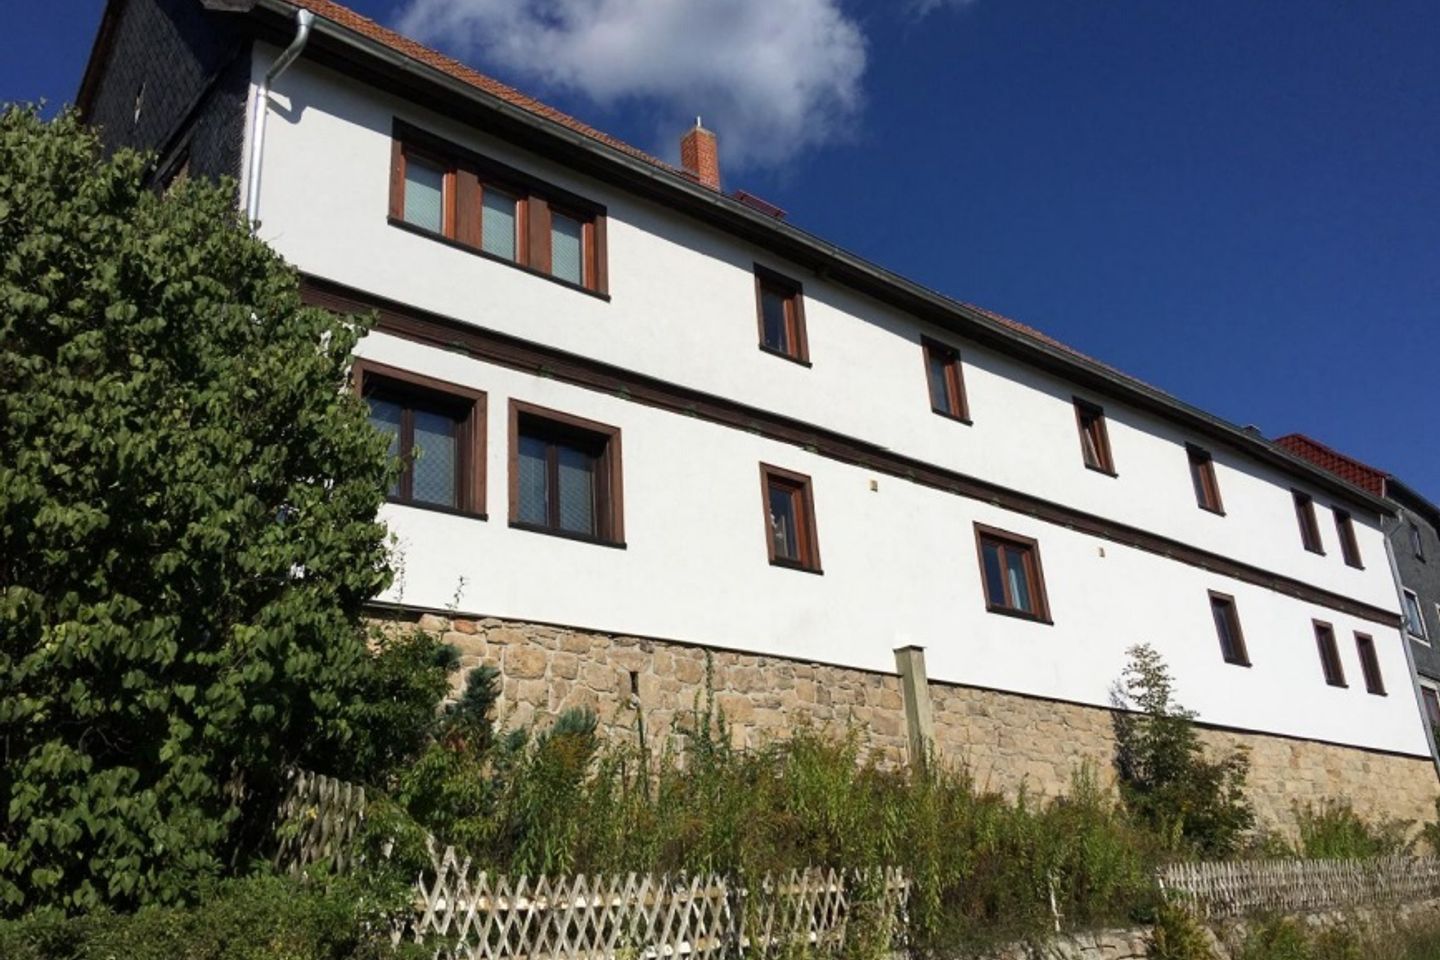 Stunning Farmhouse Renovation For Sale In Arnstadt Thuringia Germany, Thuringia, Germany